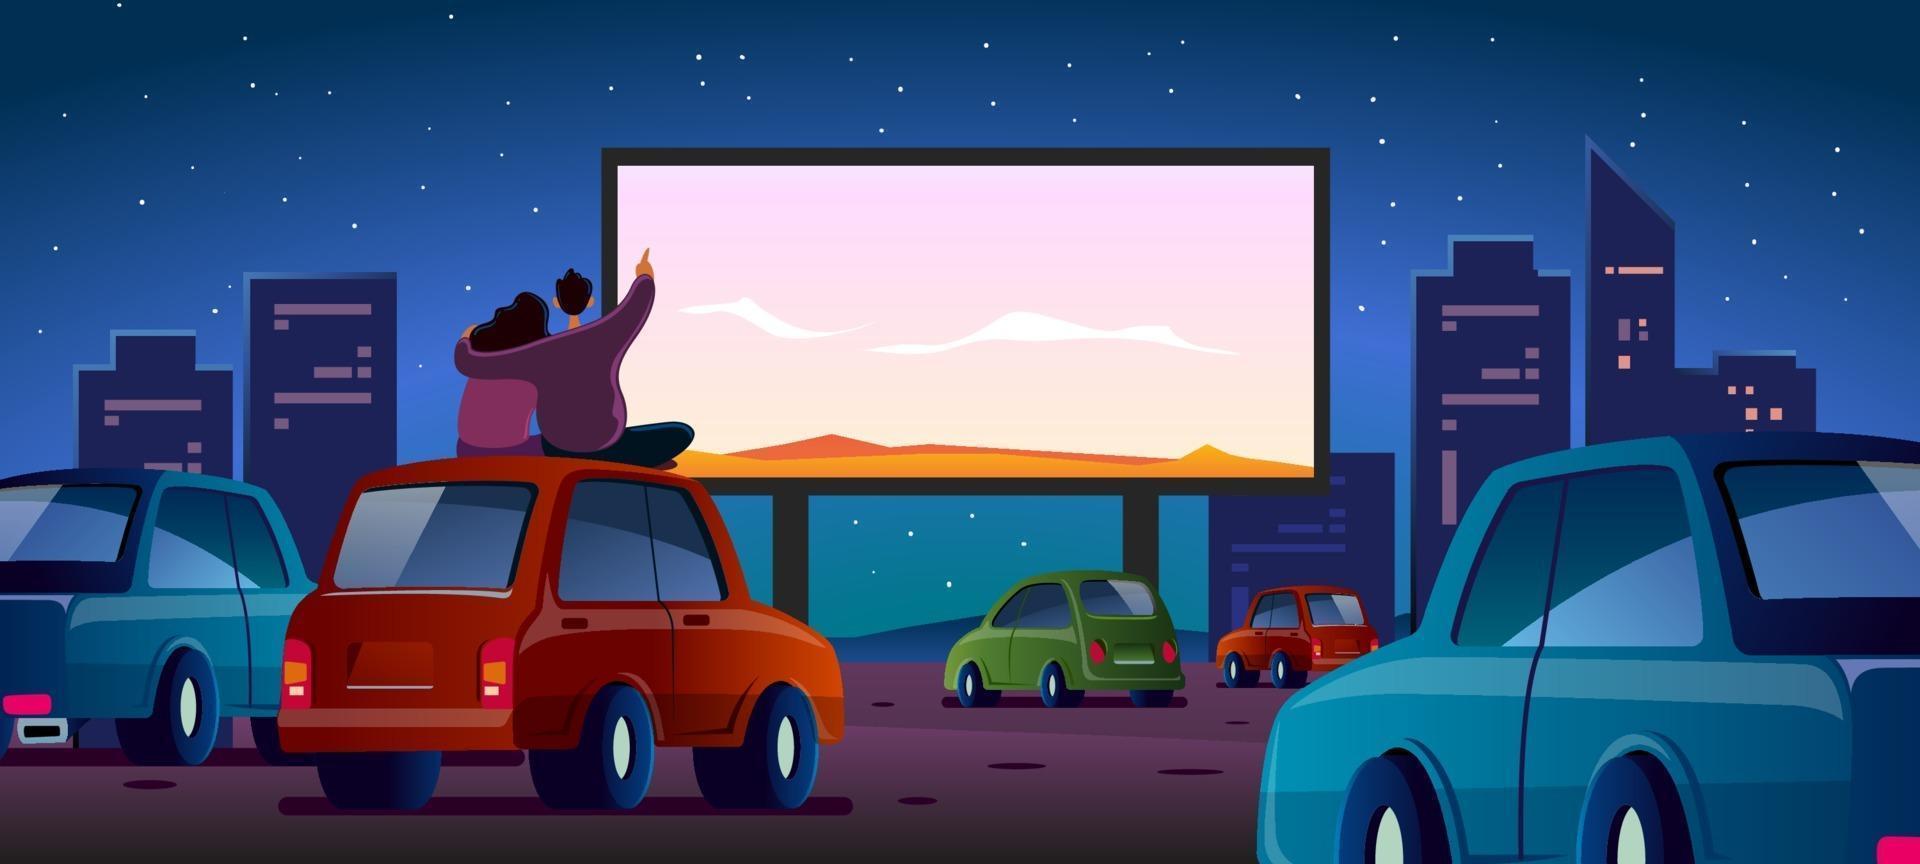 Watch A Movie in The Car vector